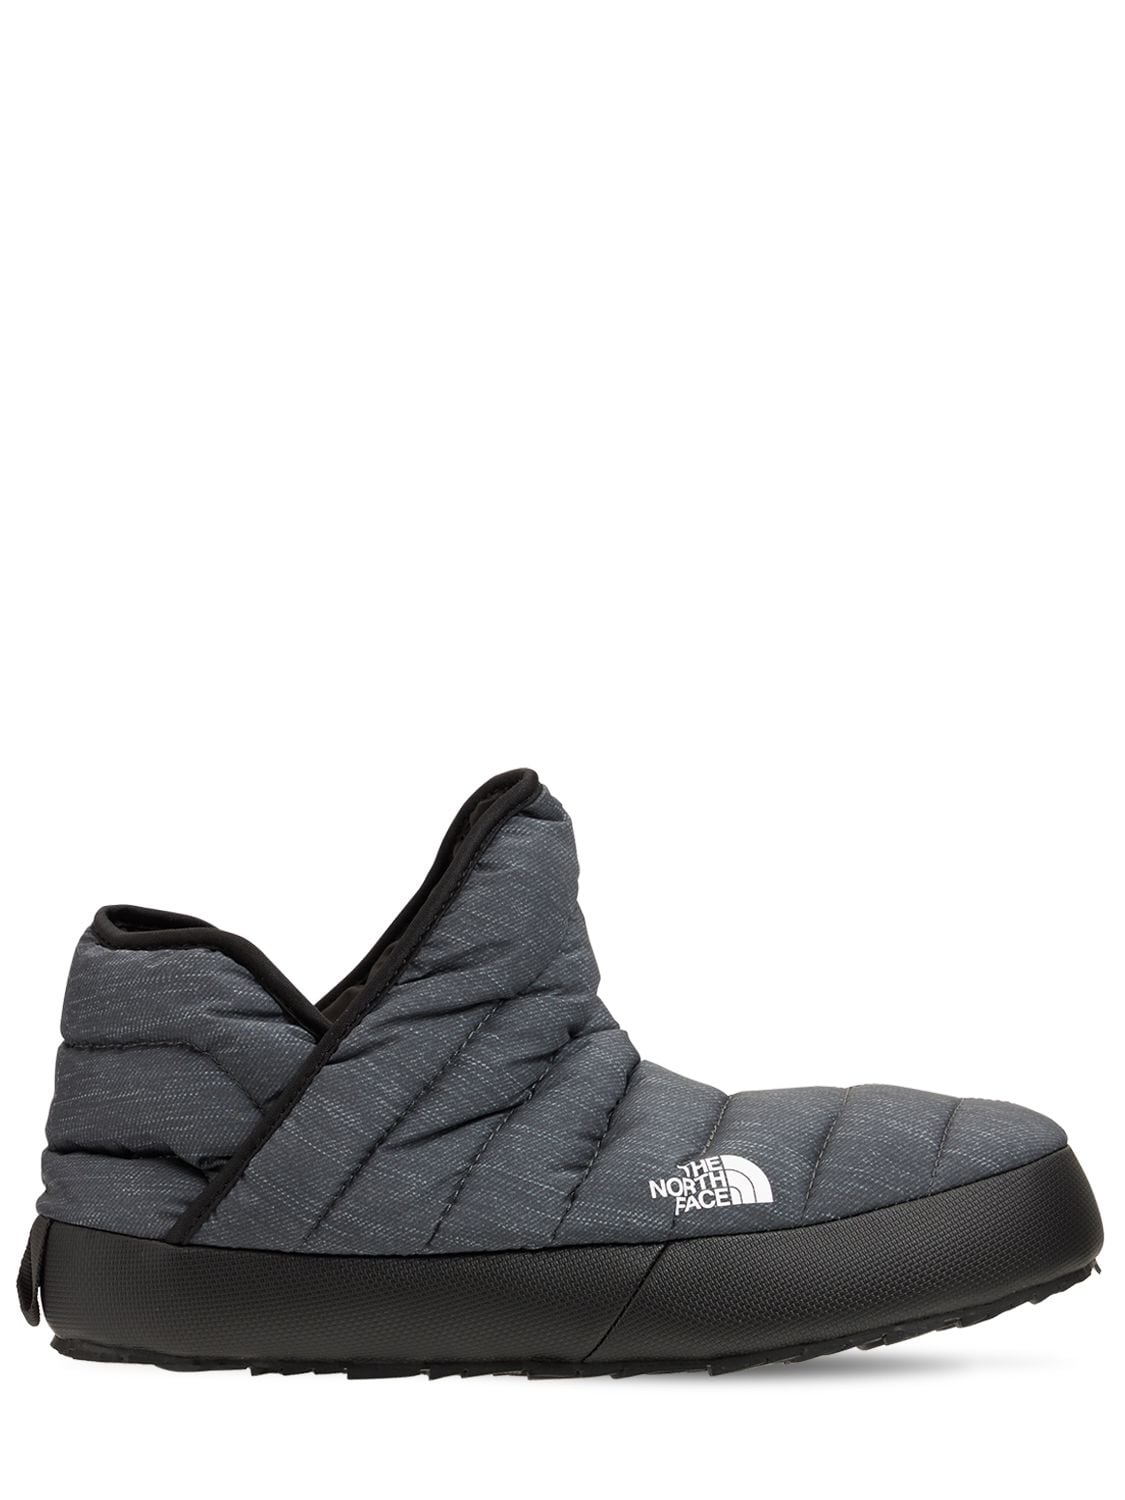 Thermoball Traction Down Booties - THE NORTH FACE - Modalova